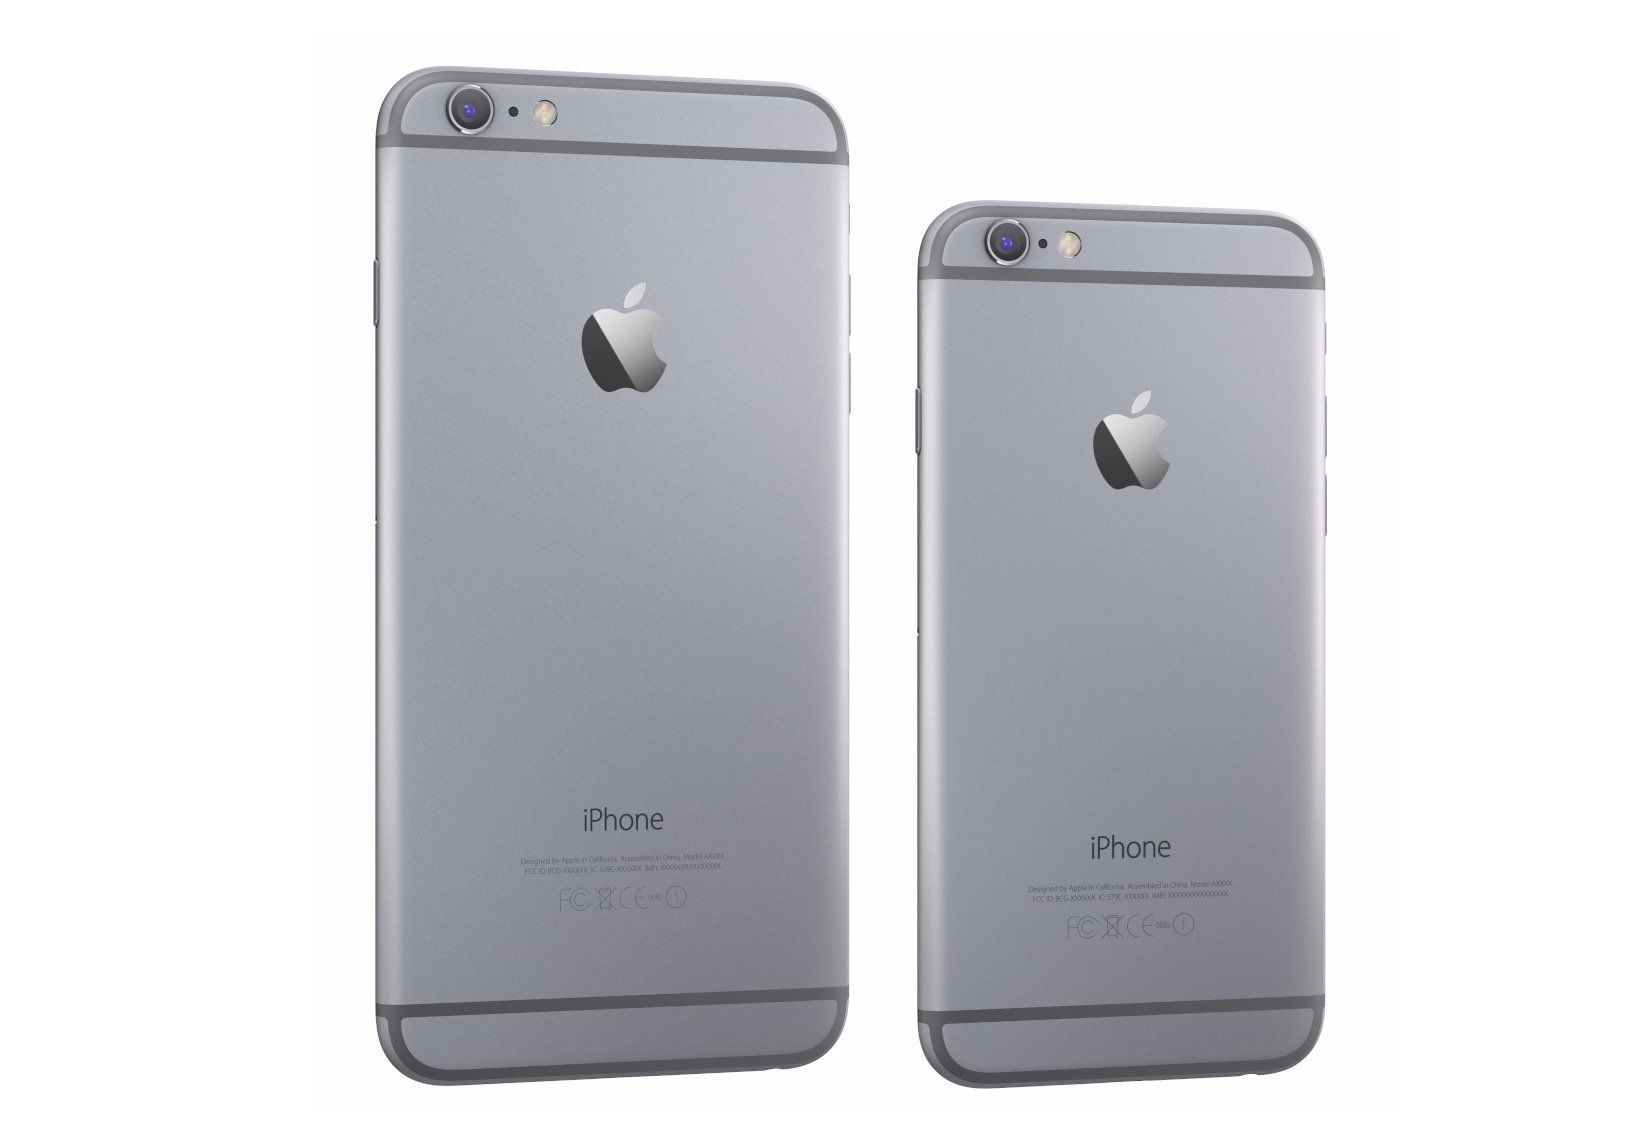 Dader Geduld Contractie What iPhone 6 Color to Buy: Gold, Silver or Gray?